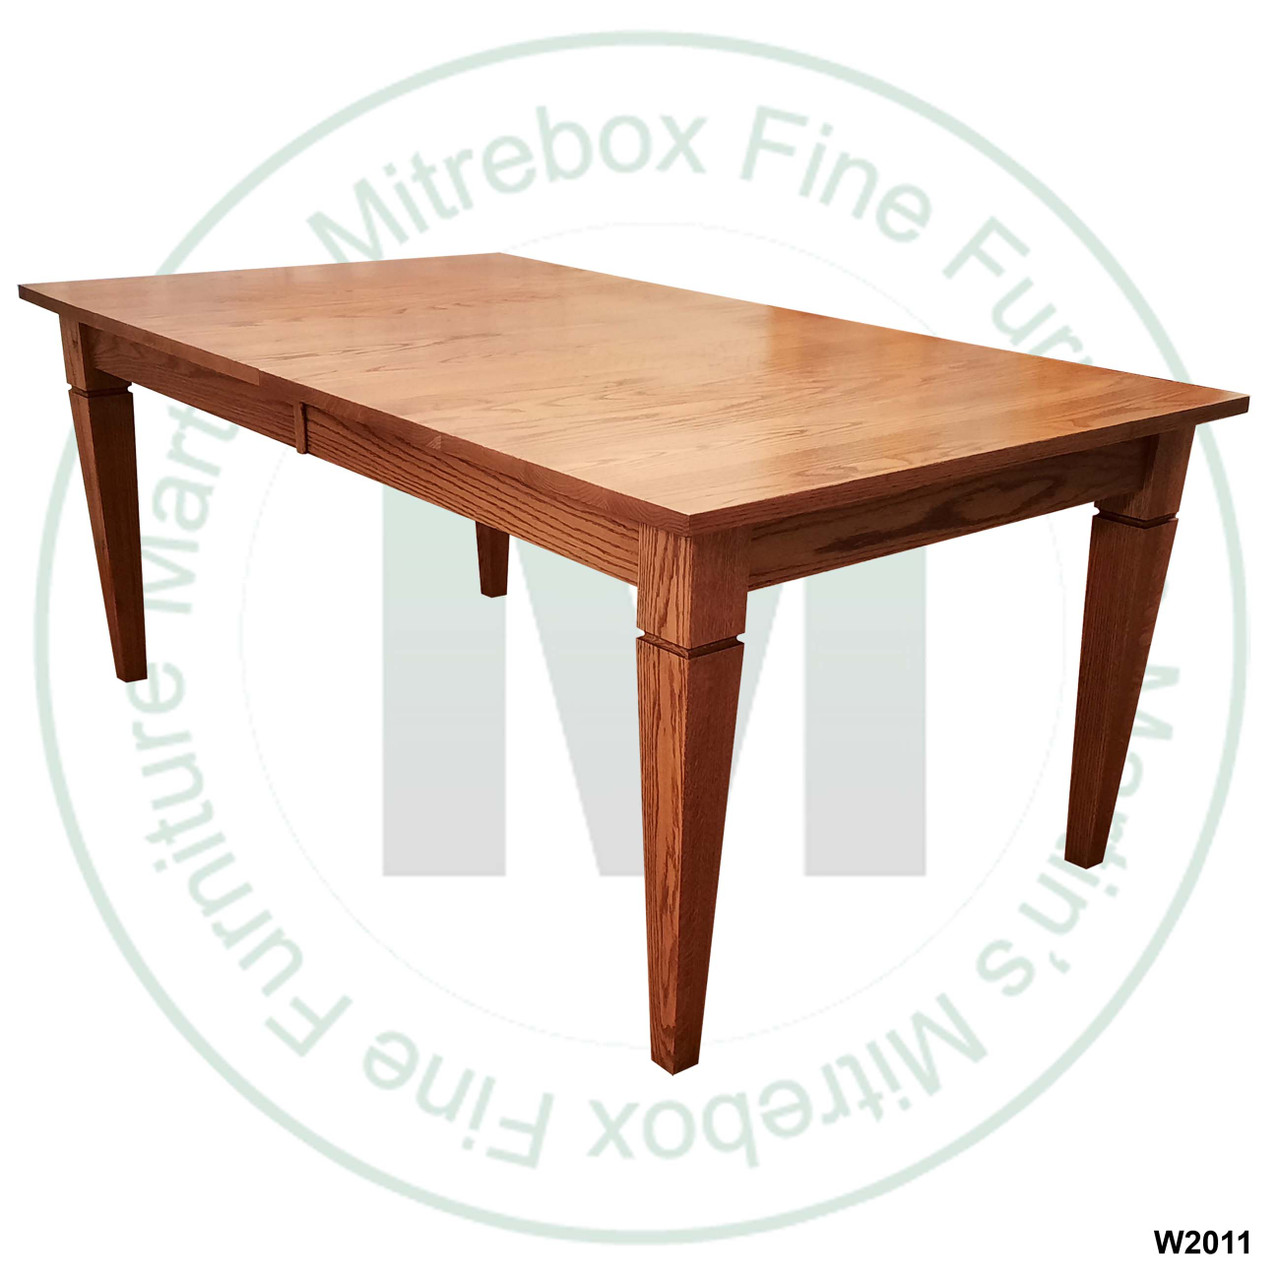 Oak Reesor Solid Top Harvest Table 42''D x 72''W x 30''H Table Has 1'' Thick Top And 2 - 16'' Extensions